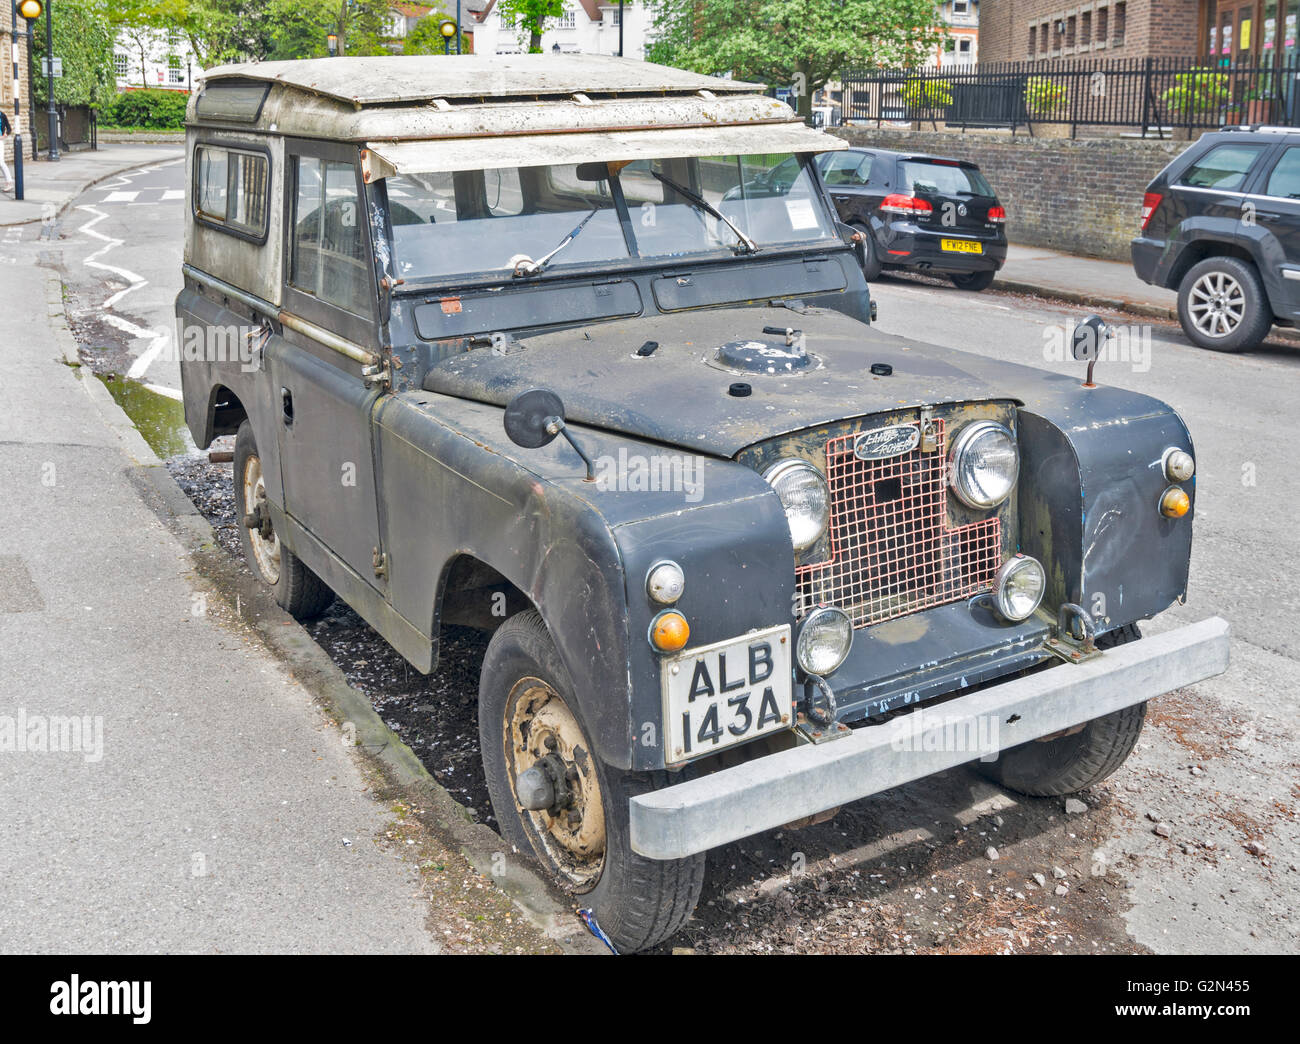 OXFORD CITY AN OLD LAND ROVER VEHICLE PARKED IN COWLEY PLAIN Stock Photo